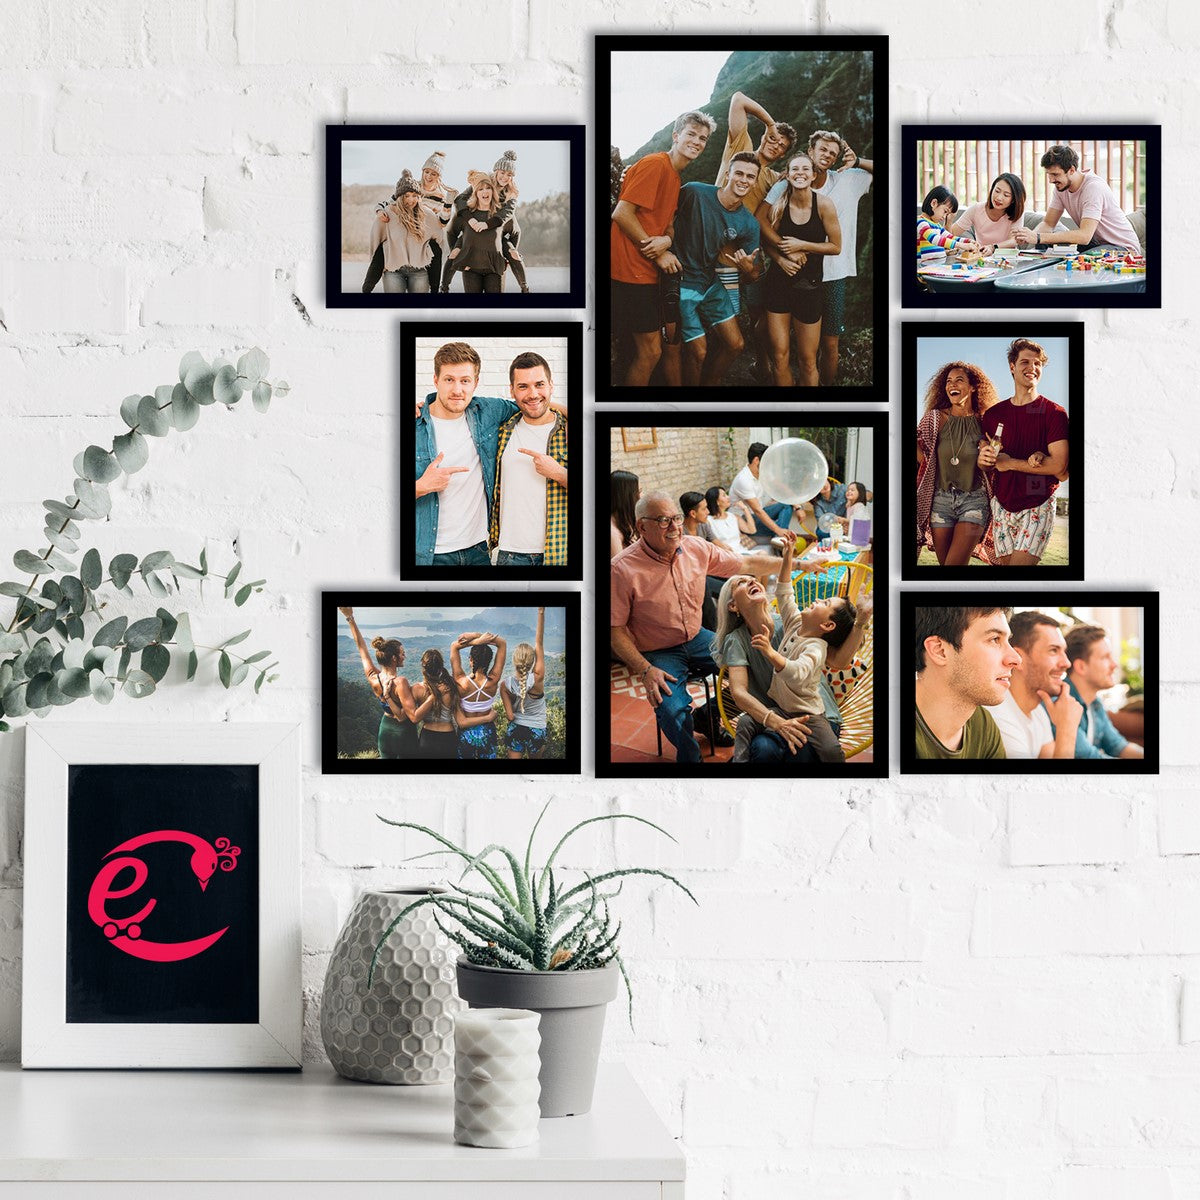 Memory Wall Collage Photo Frame - Set of 8 Photo Frames for 6 Photos of 5"x7", 2 Photos of 8"x10" 1